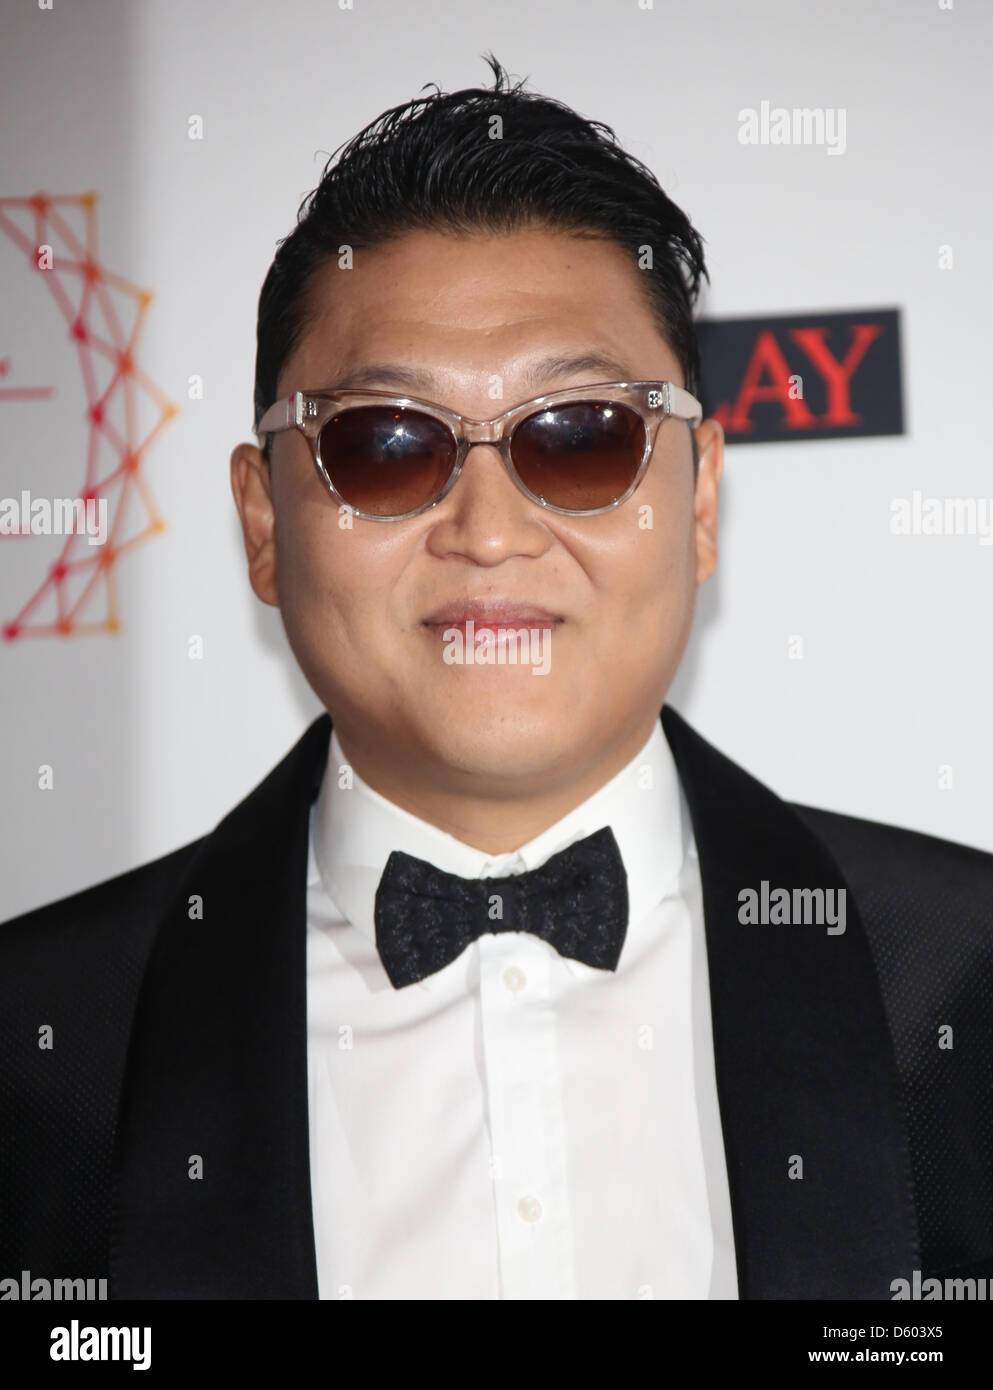 Psy korean singer High Resolution Stock Photography and Images - Alamy